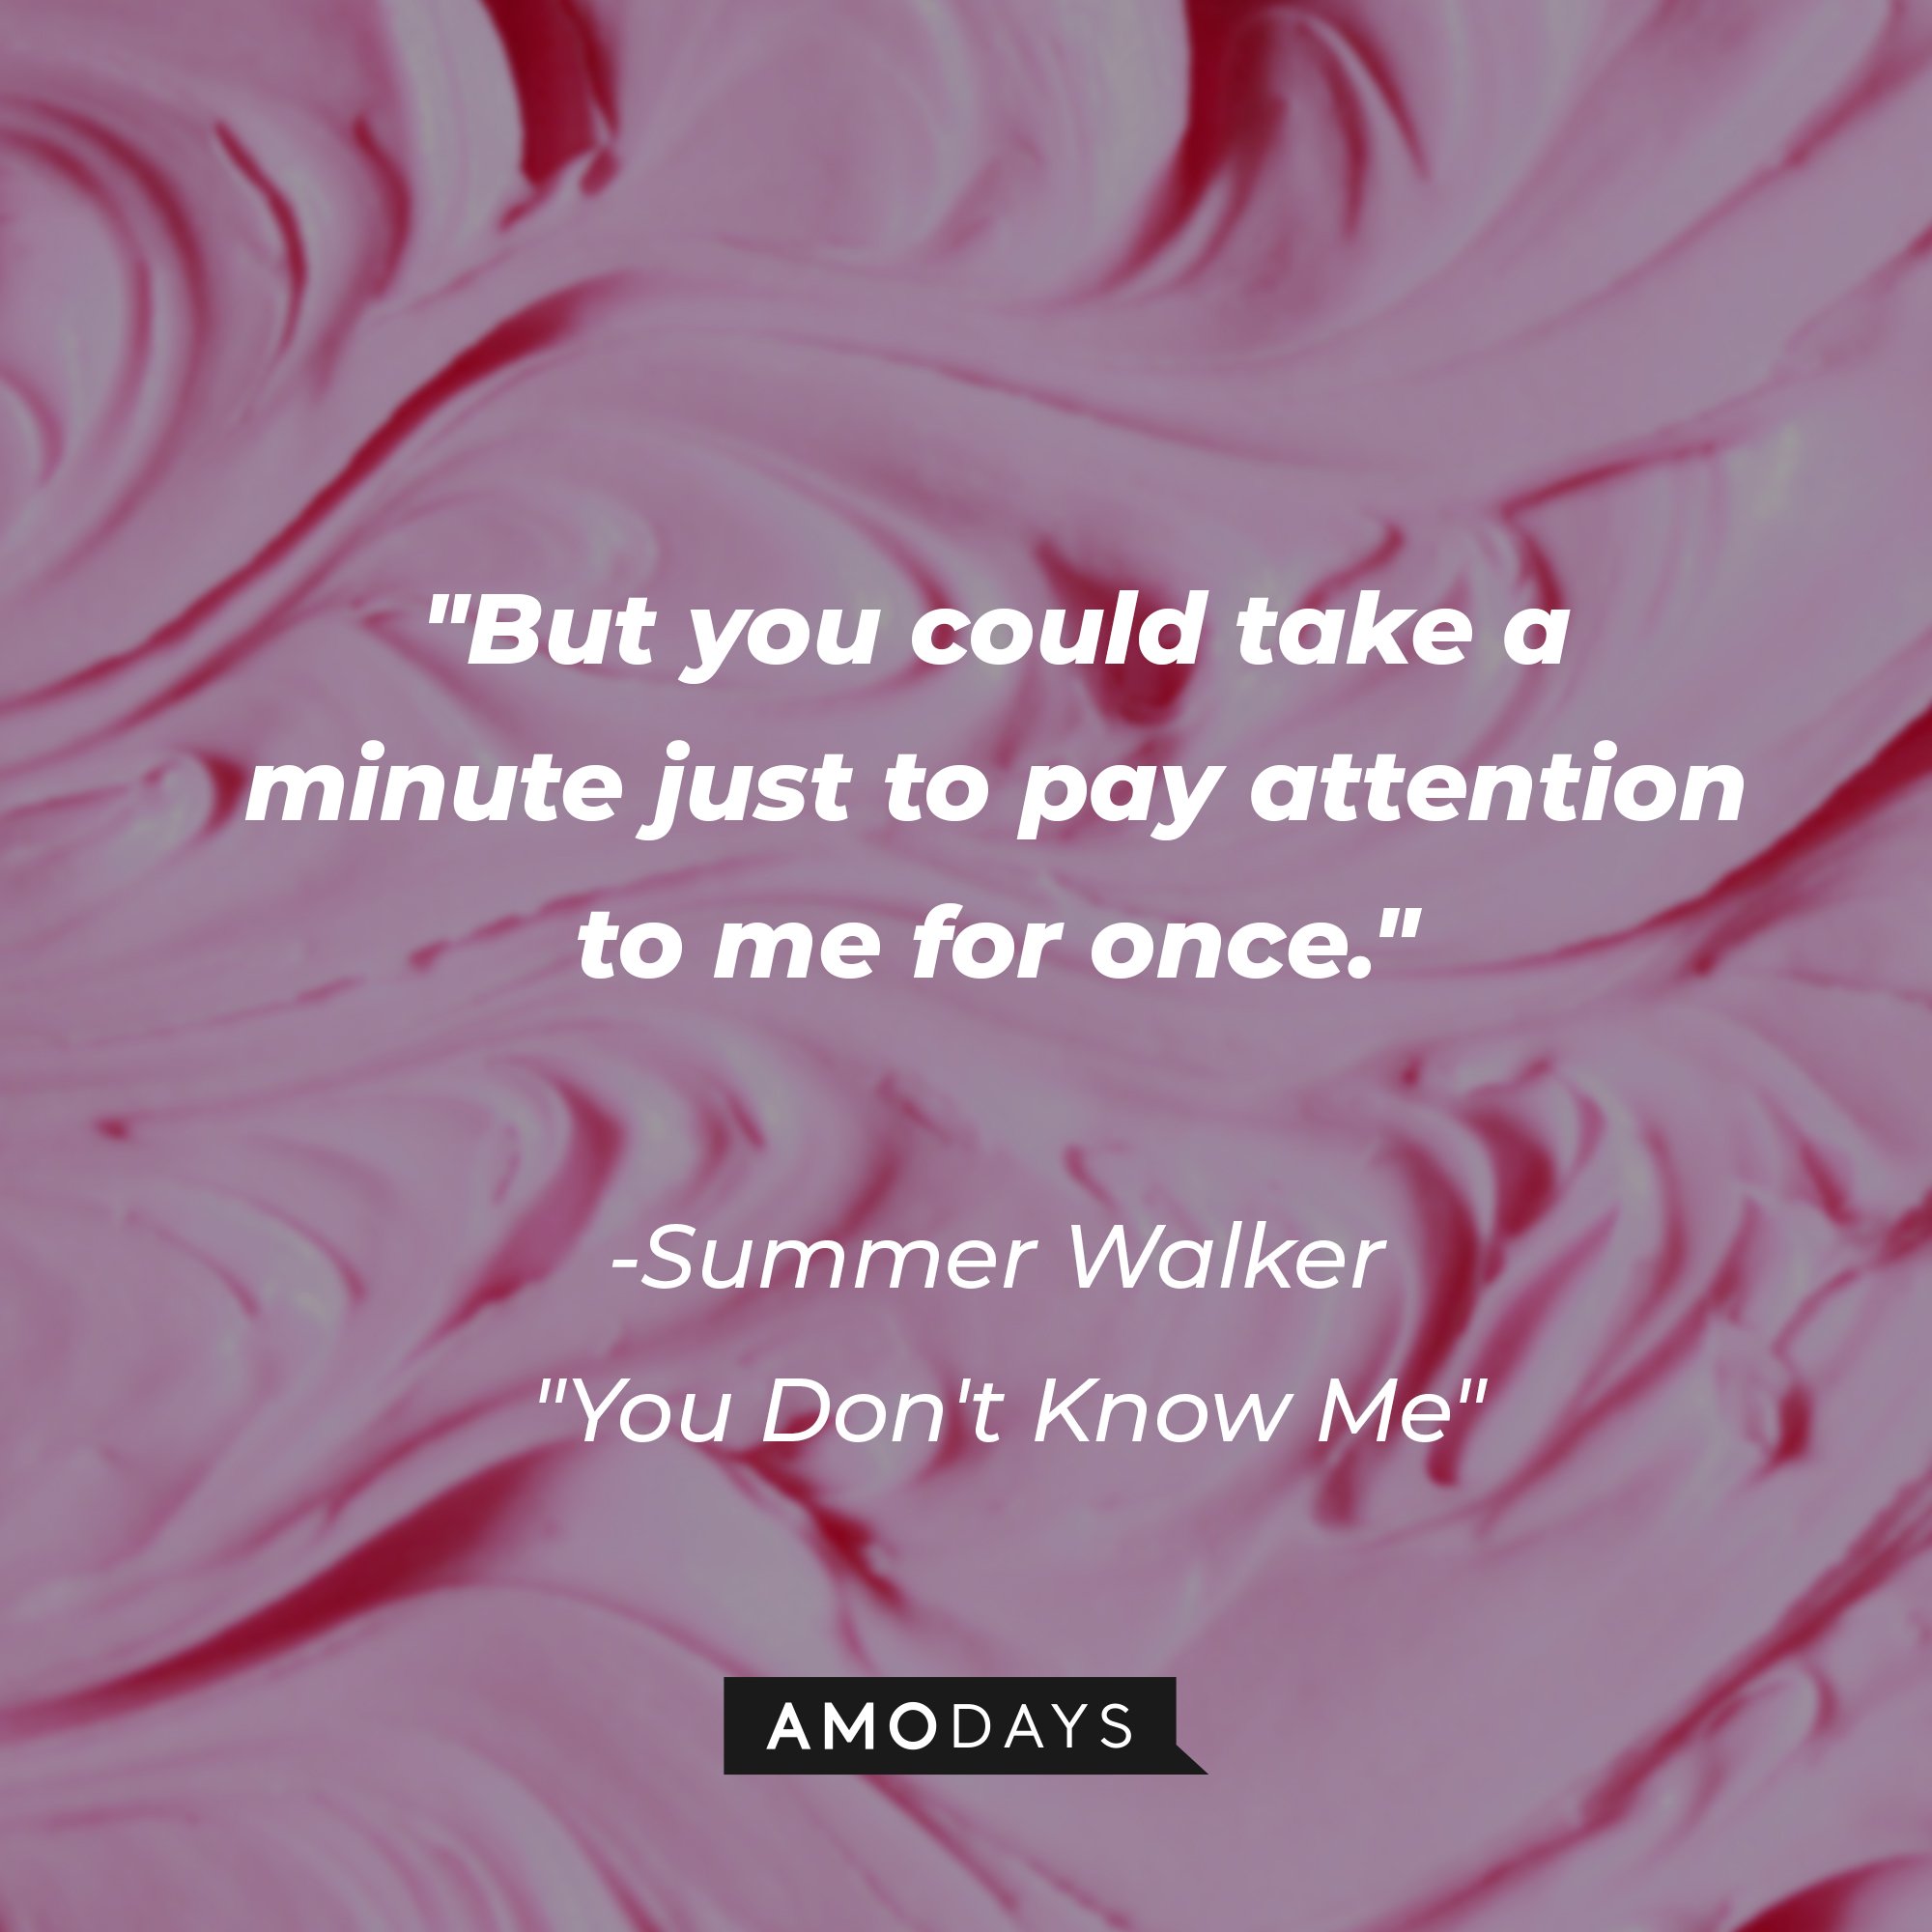 Summer Walker's "You Don't Know Me" quote: "But you could take a minute just to pay attention to mе for once." | Image: AmoDays